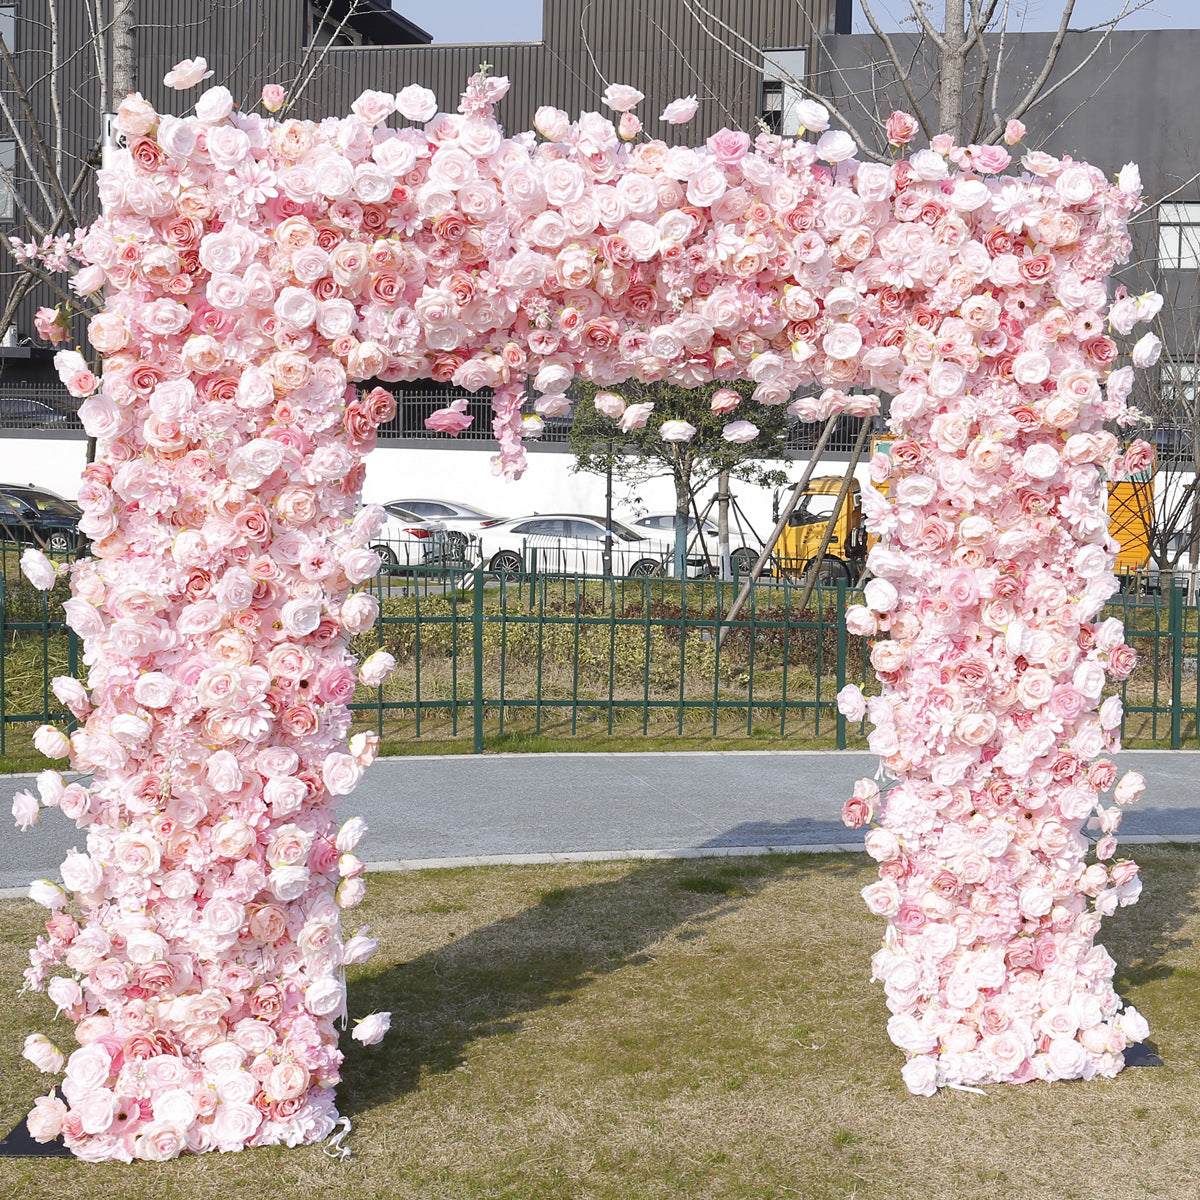 Handmade Artificial Cloth Curtain Pink Silk Flower Wall Arch Wedding Backdrop Decoration Outdoor Event Party Decor Props